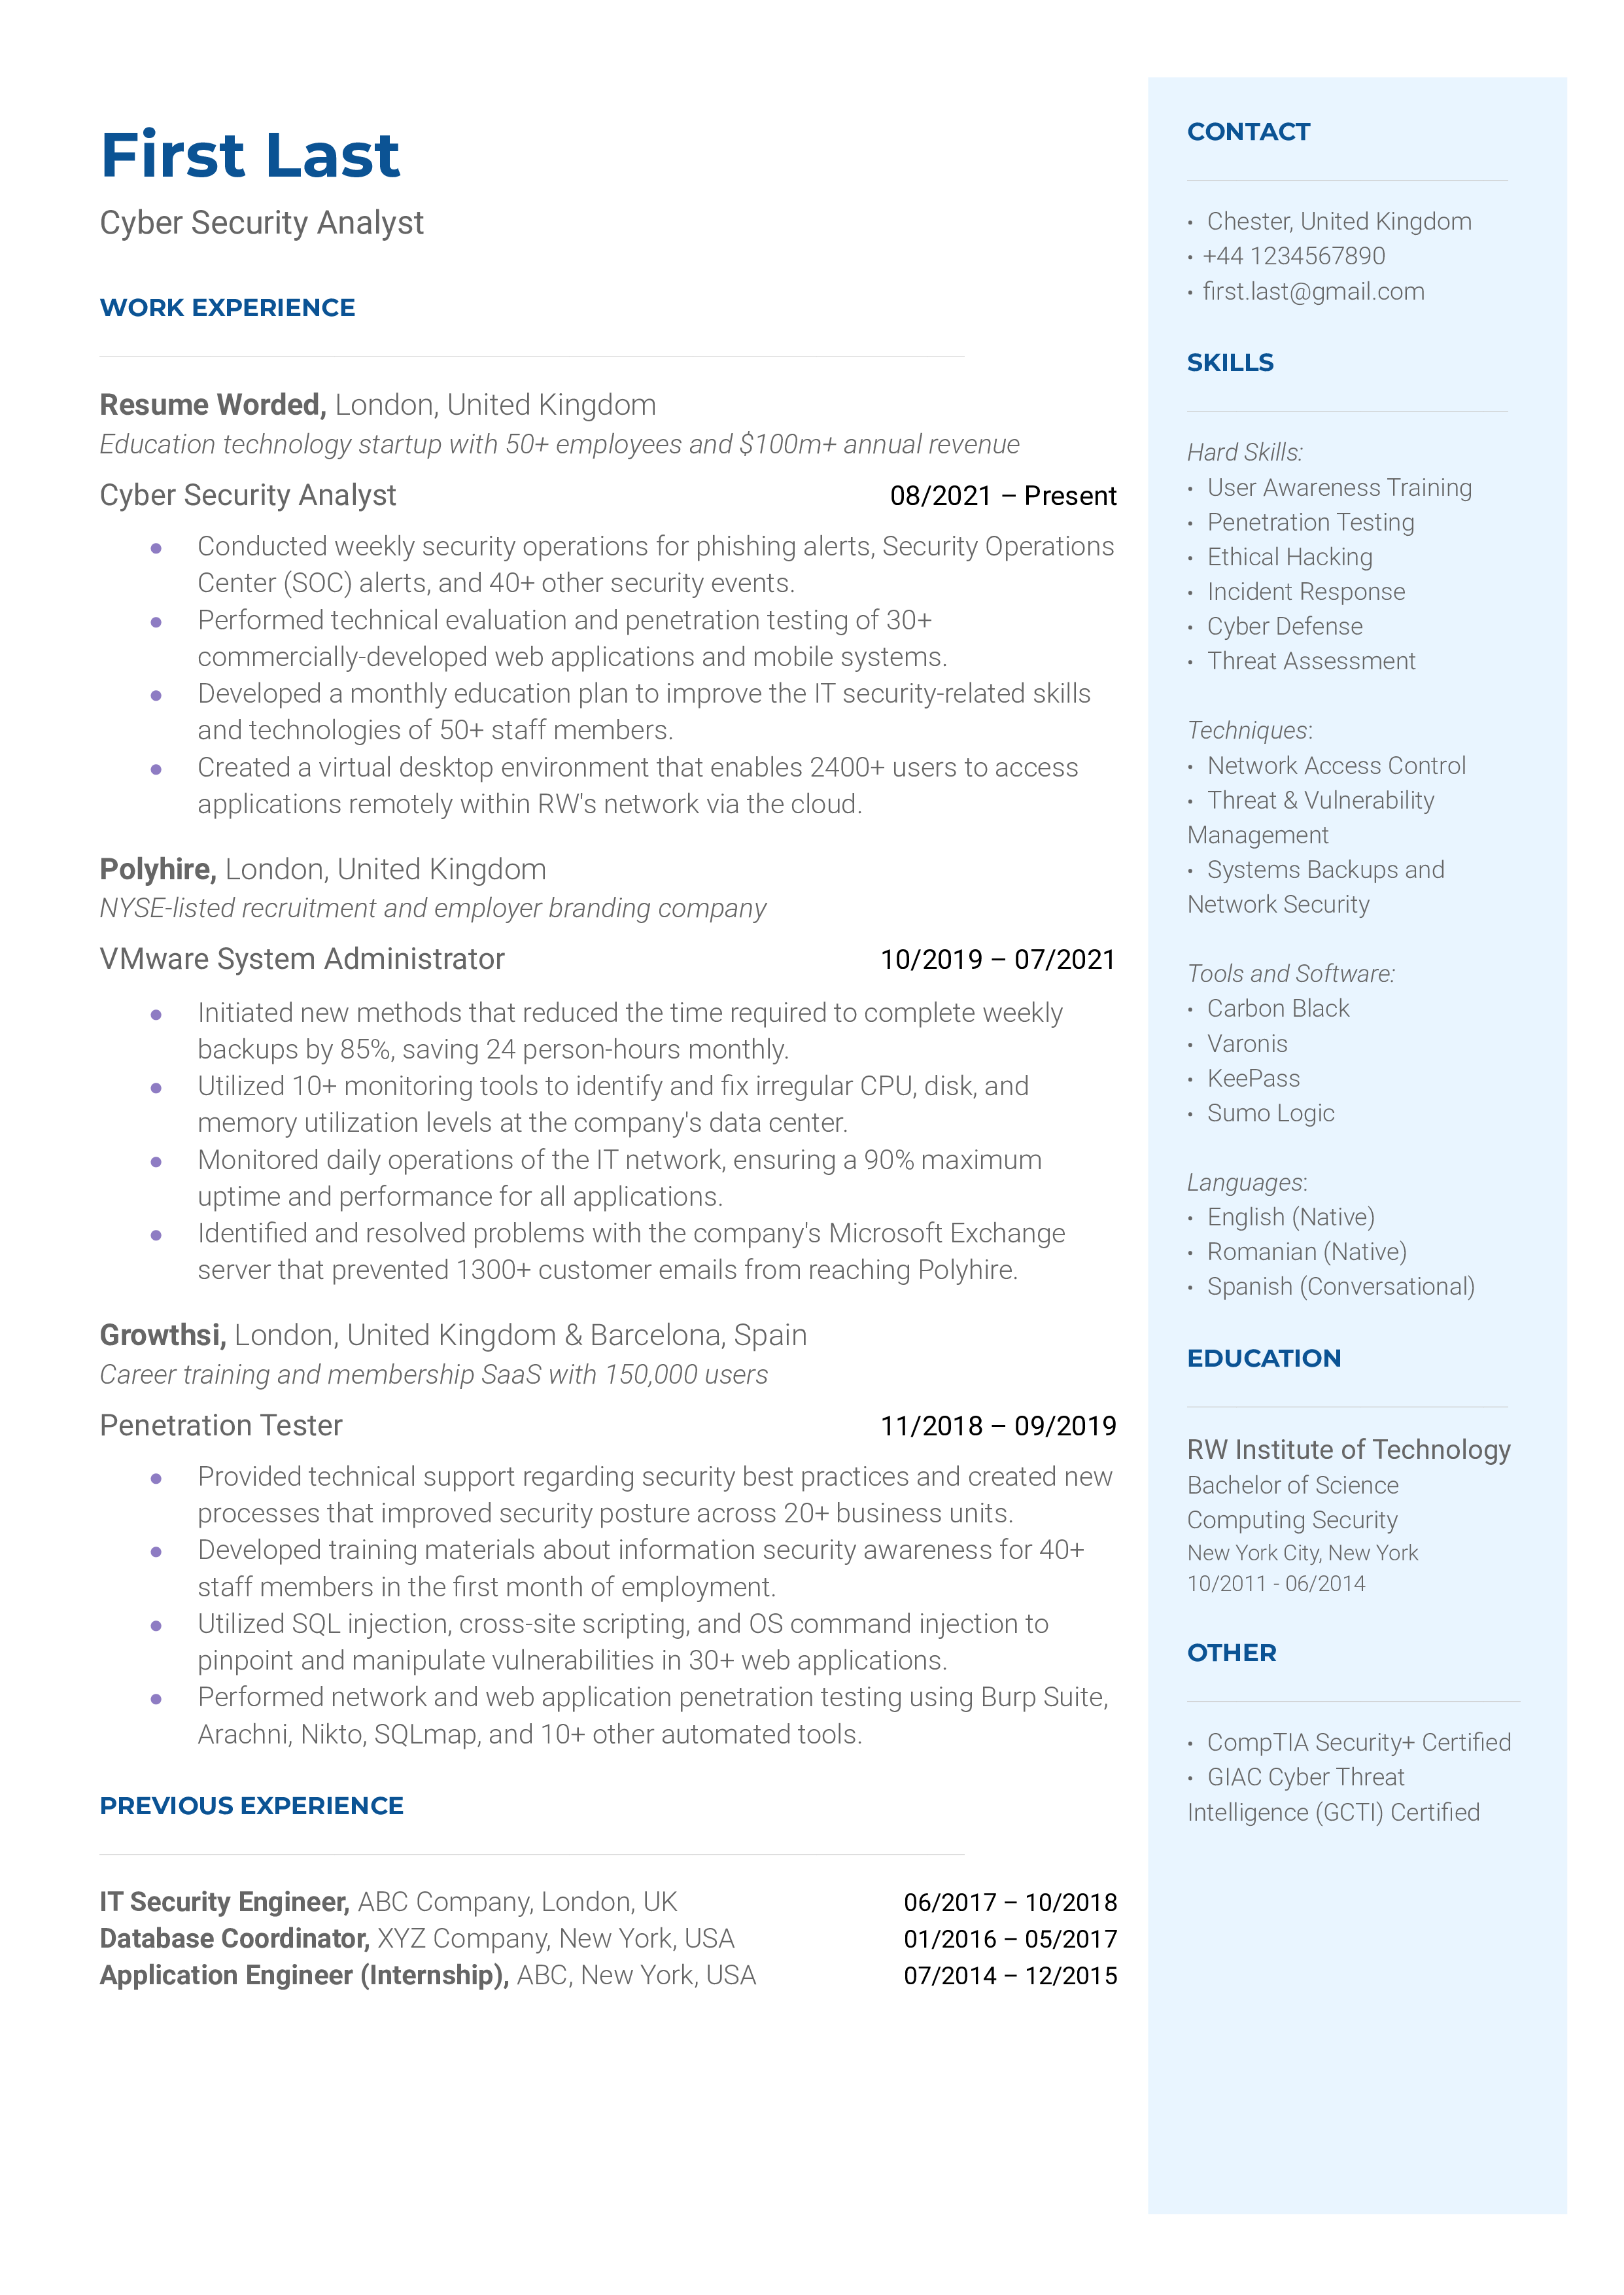 A cyber security analyst resume template including relevant techniques.